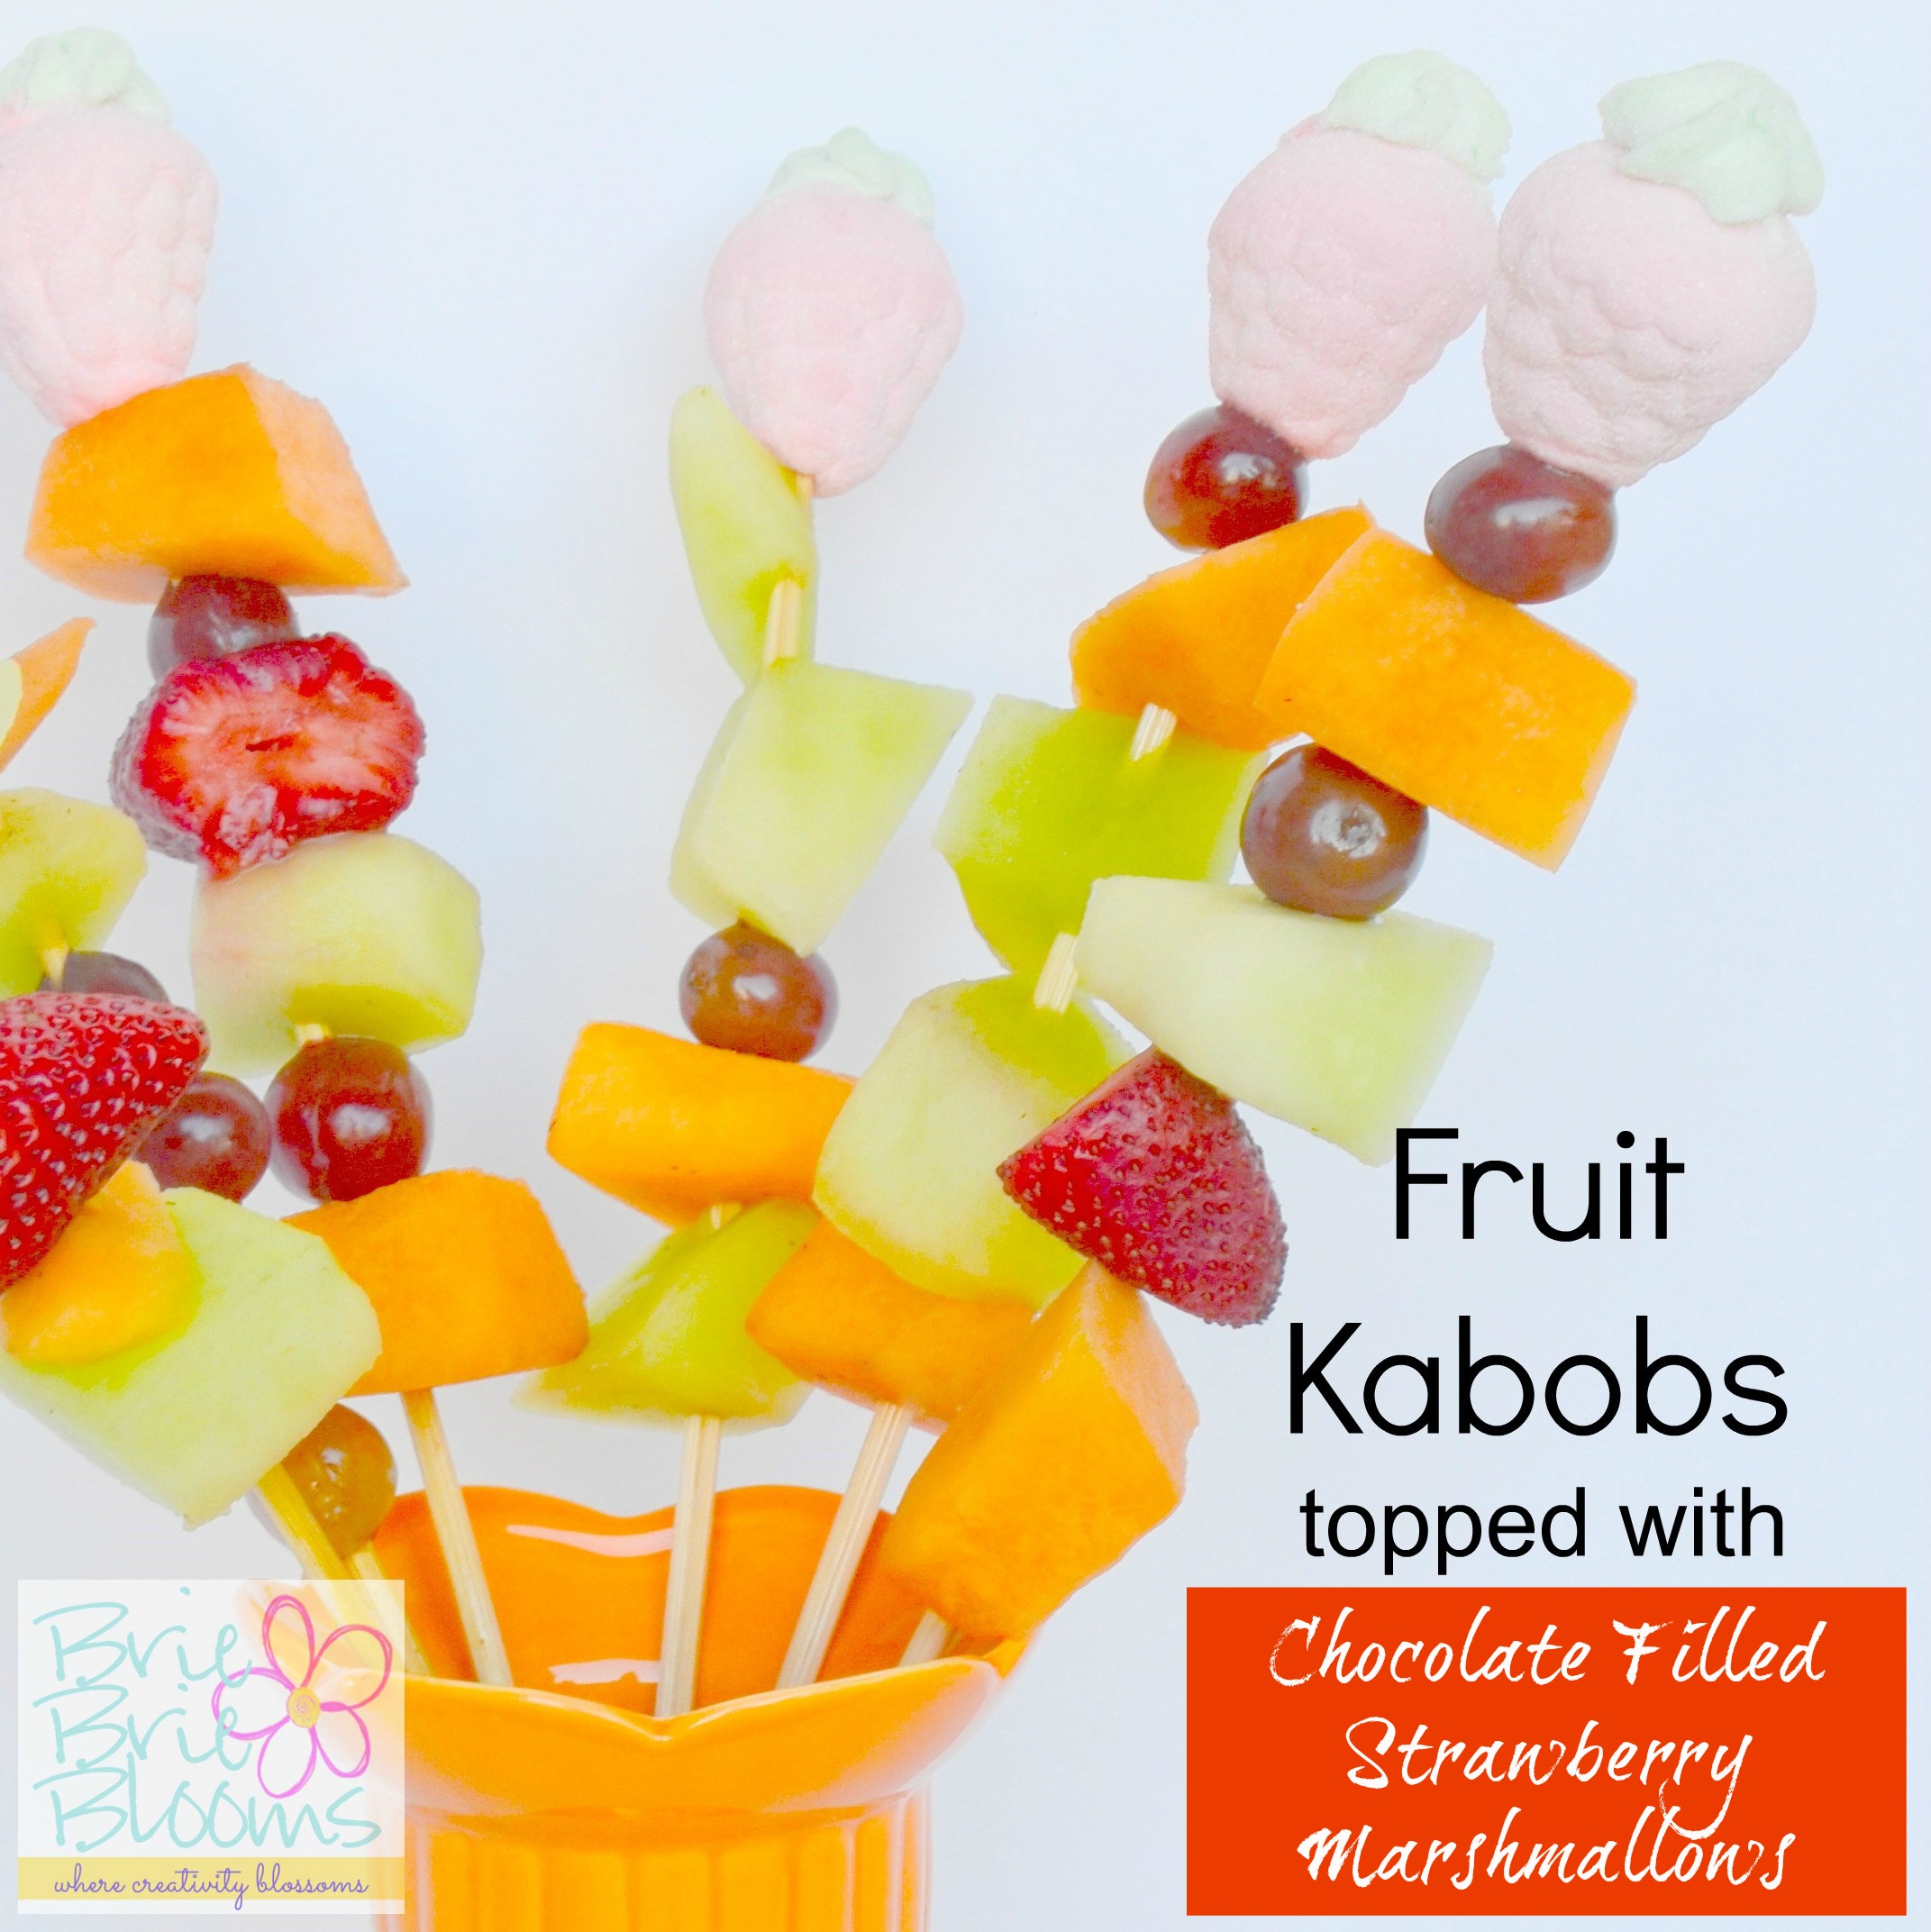 Fruit Kabobs topped with Chocolate Filled Strawberry Marshmallows